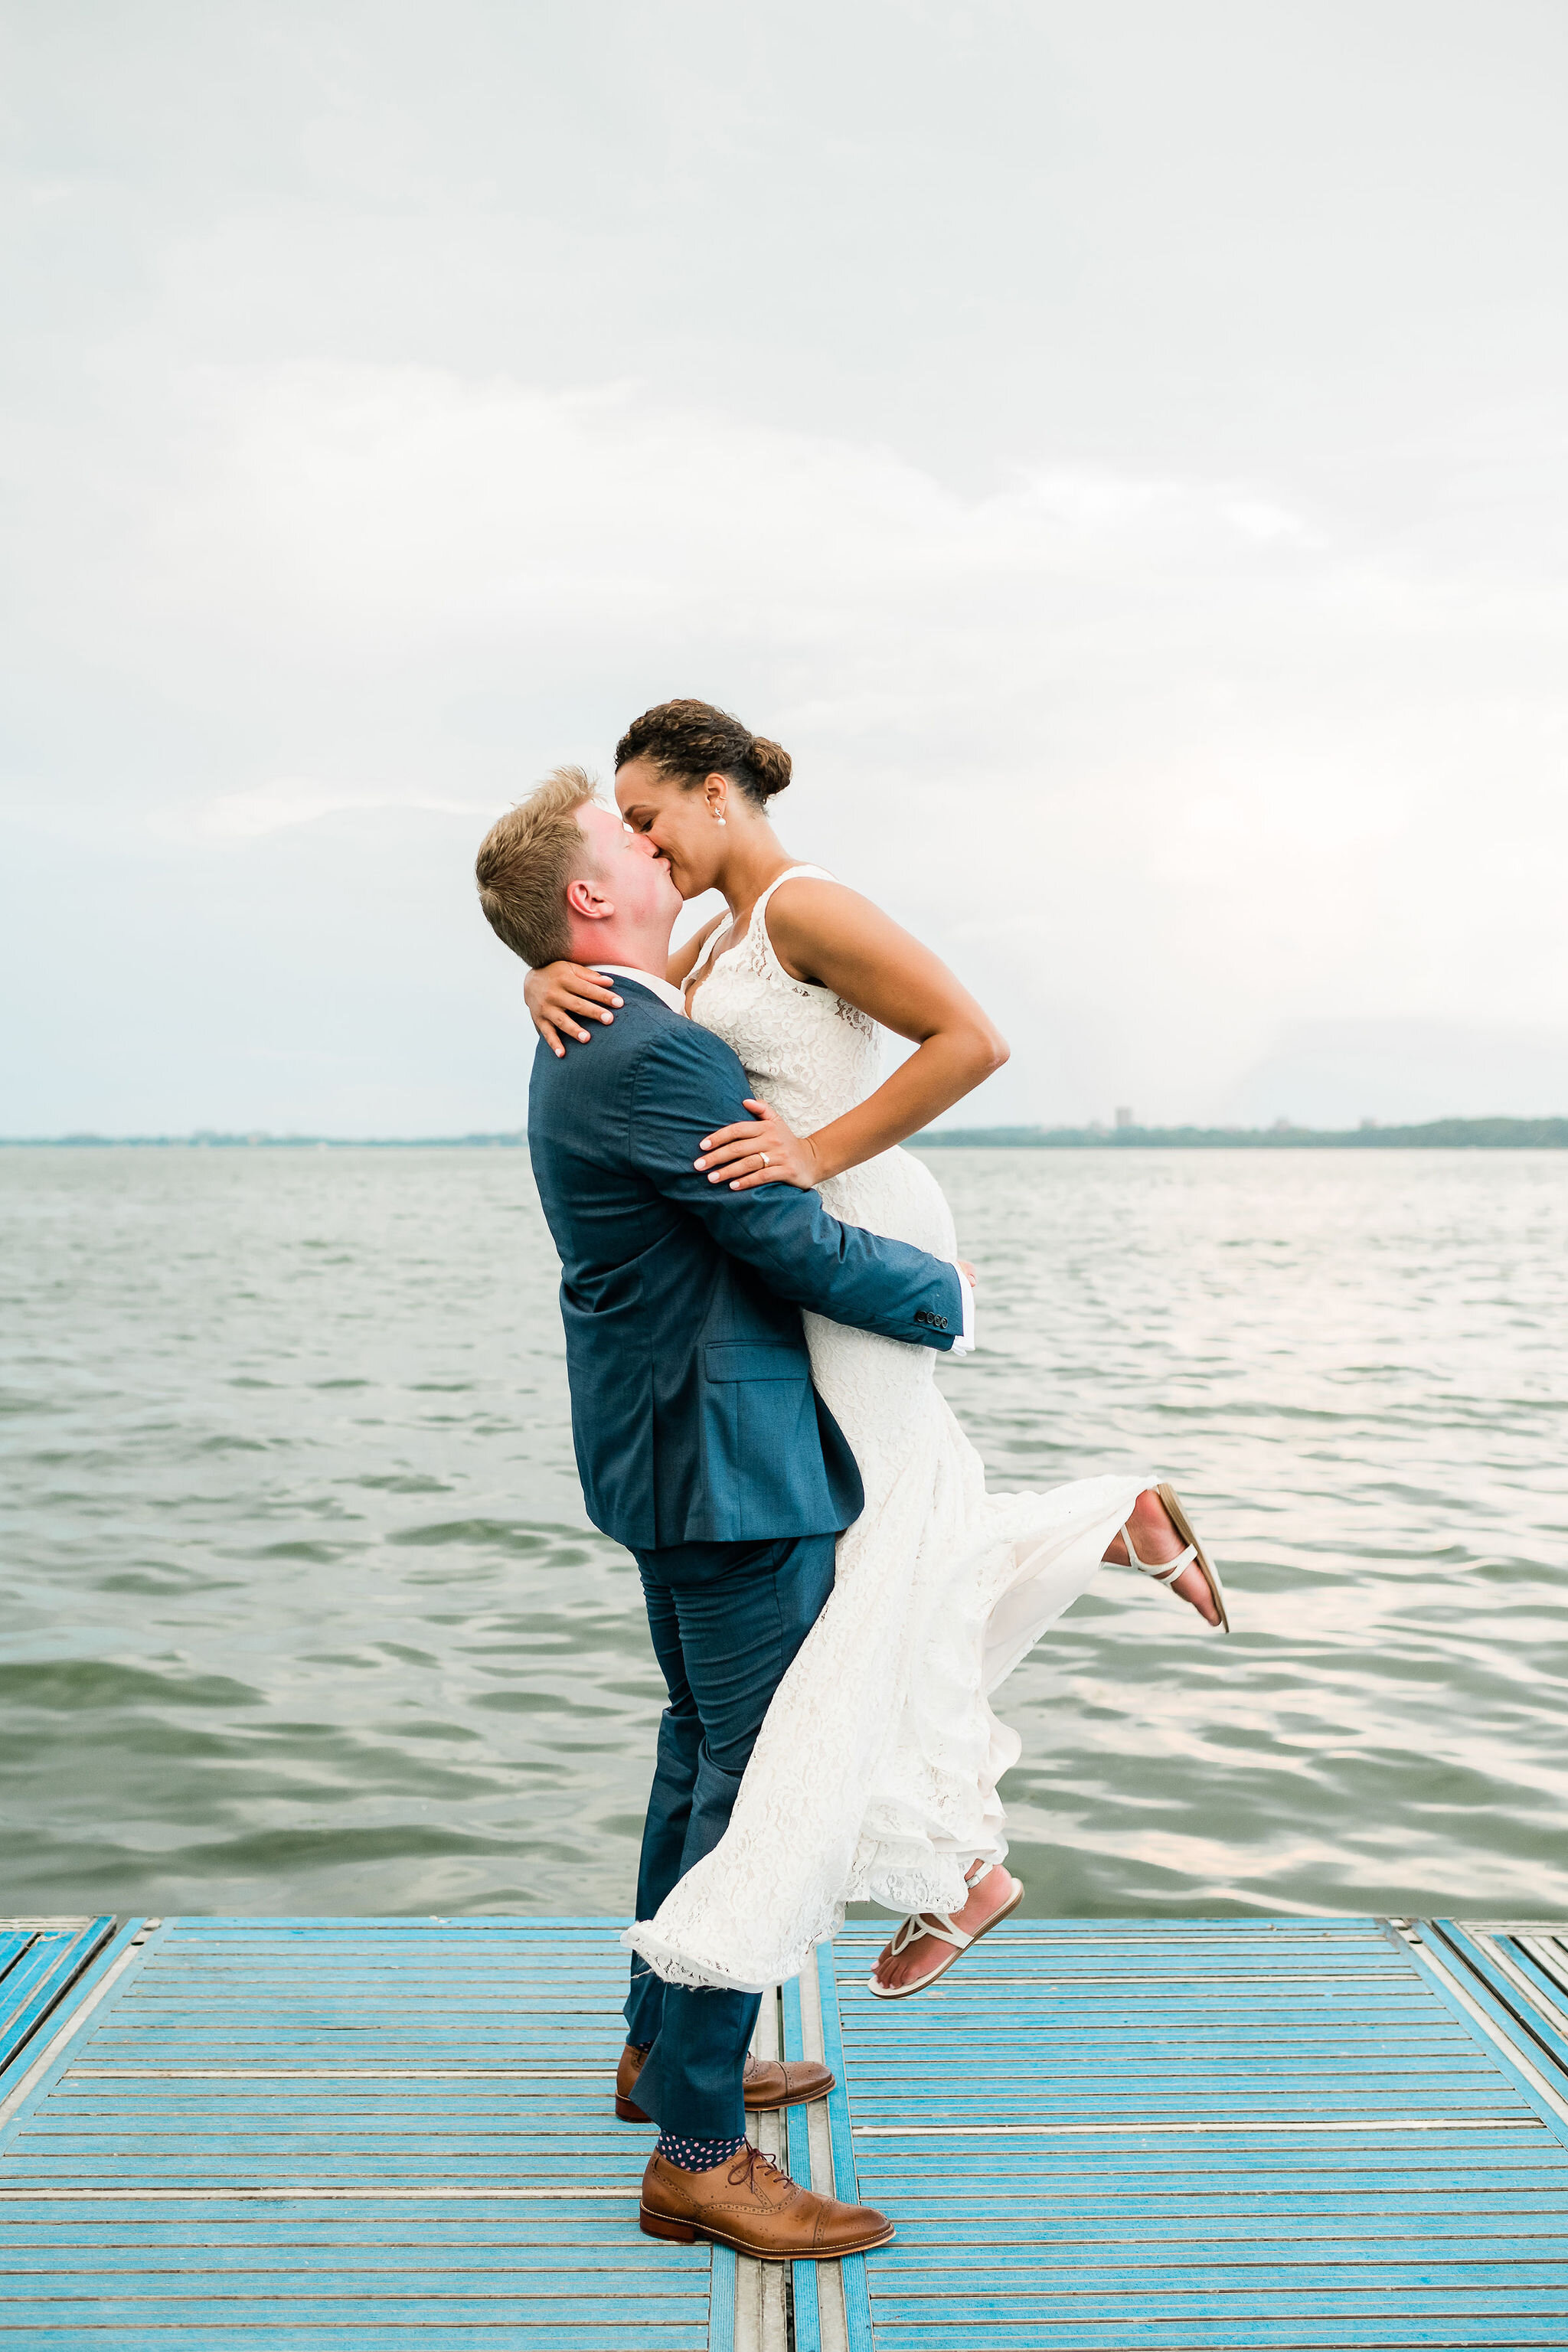 Groom lifts bride up on the dock